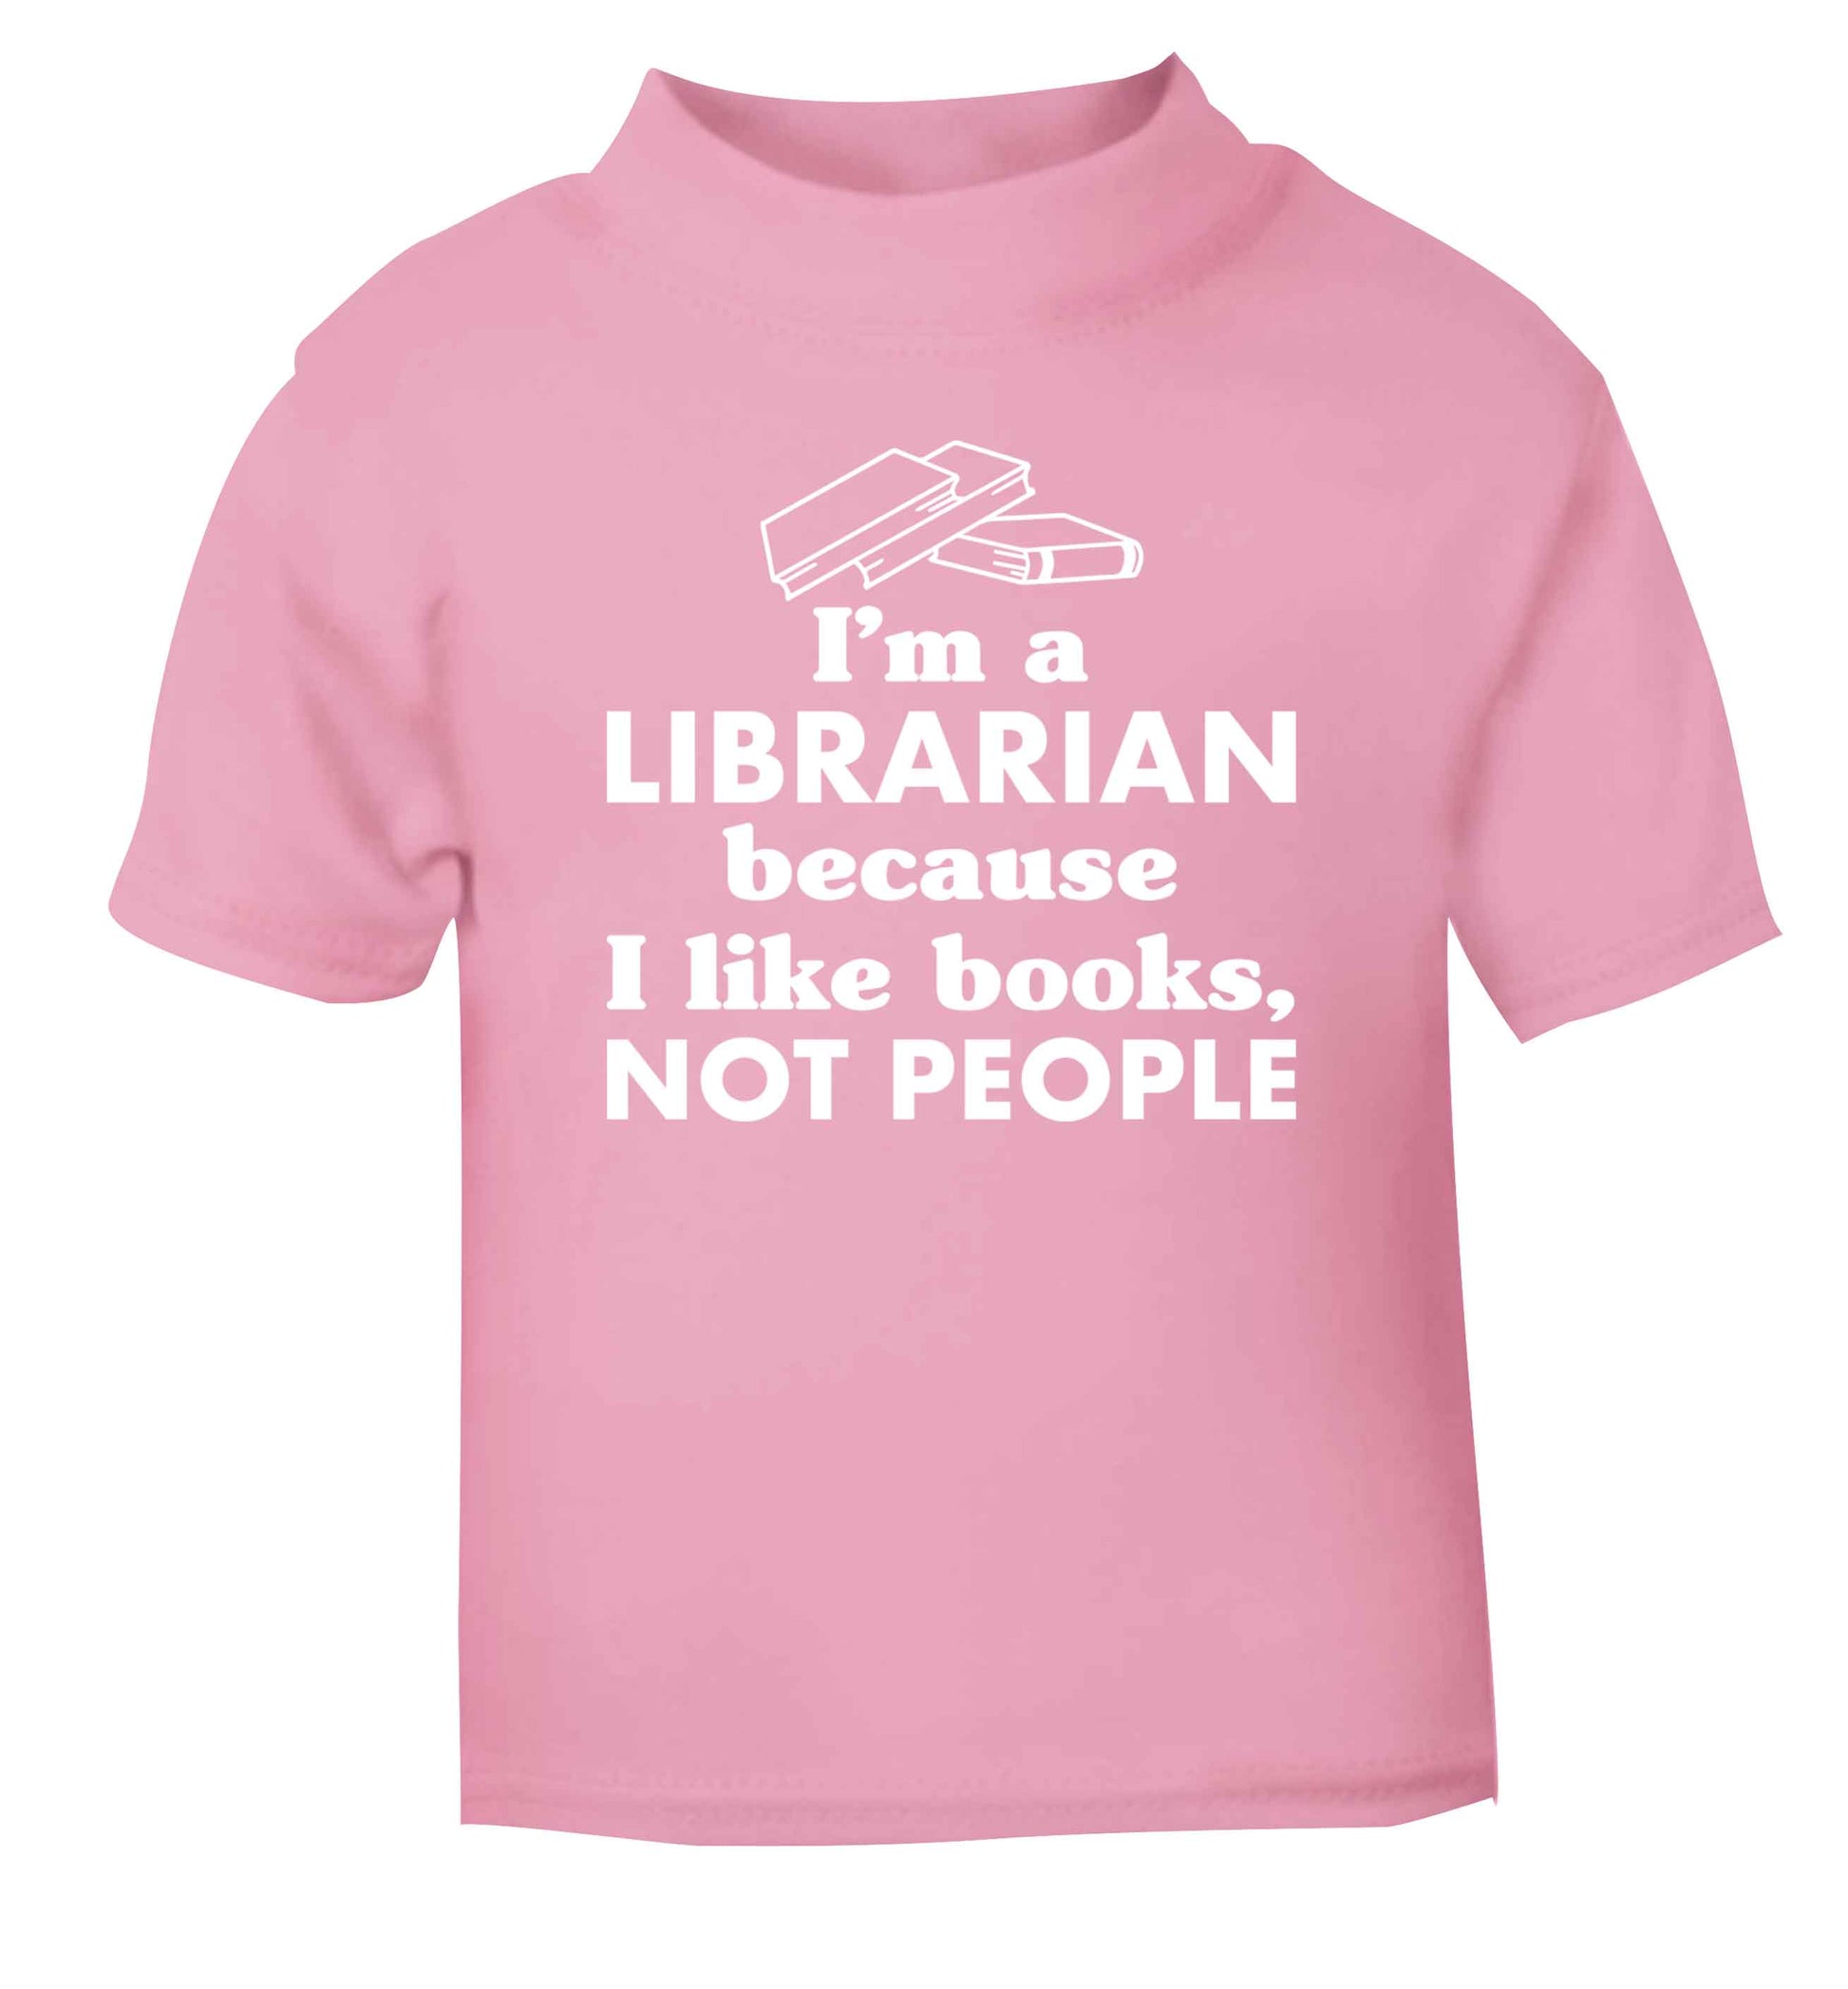 I'm a librarian because I like books not people light pink Baby Toddler Tshirt 2 Years